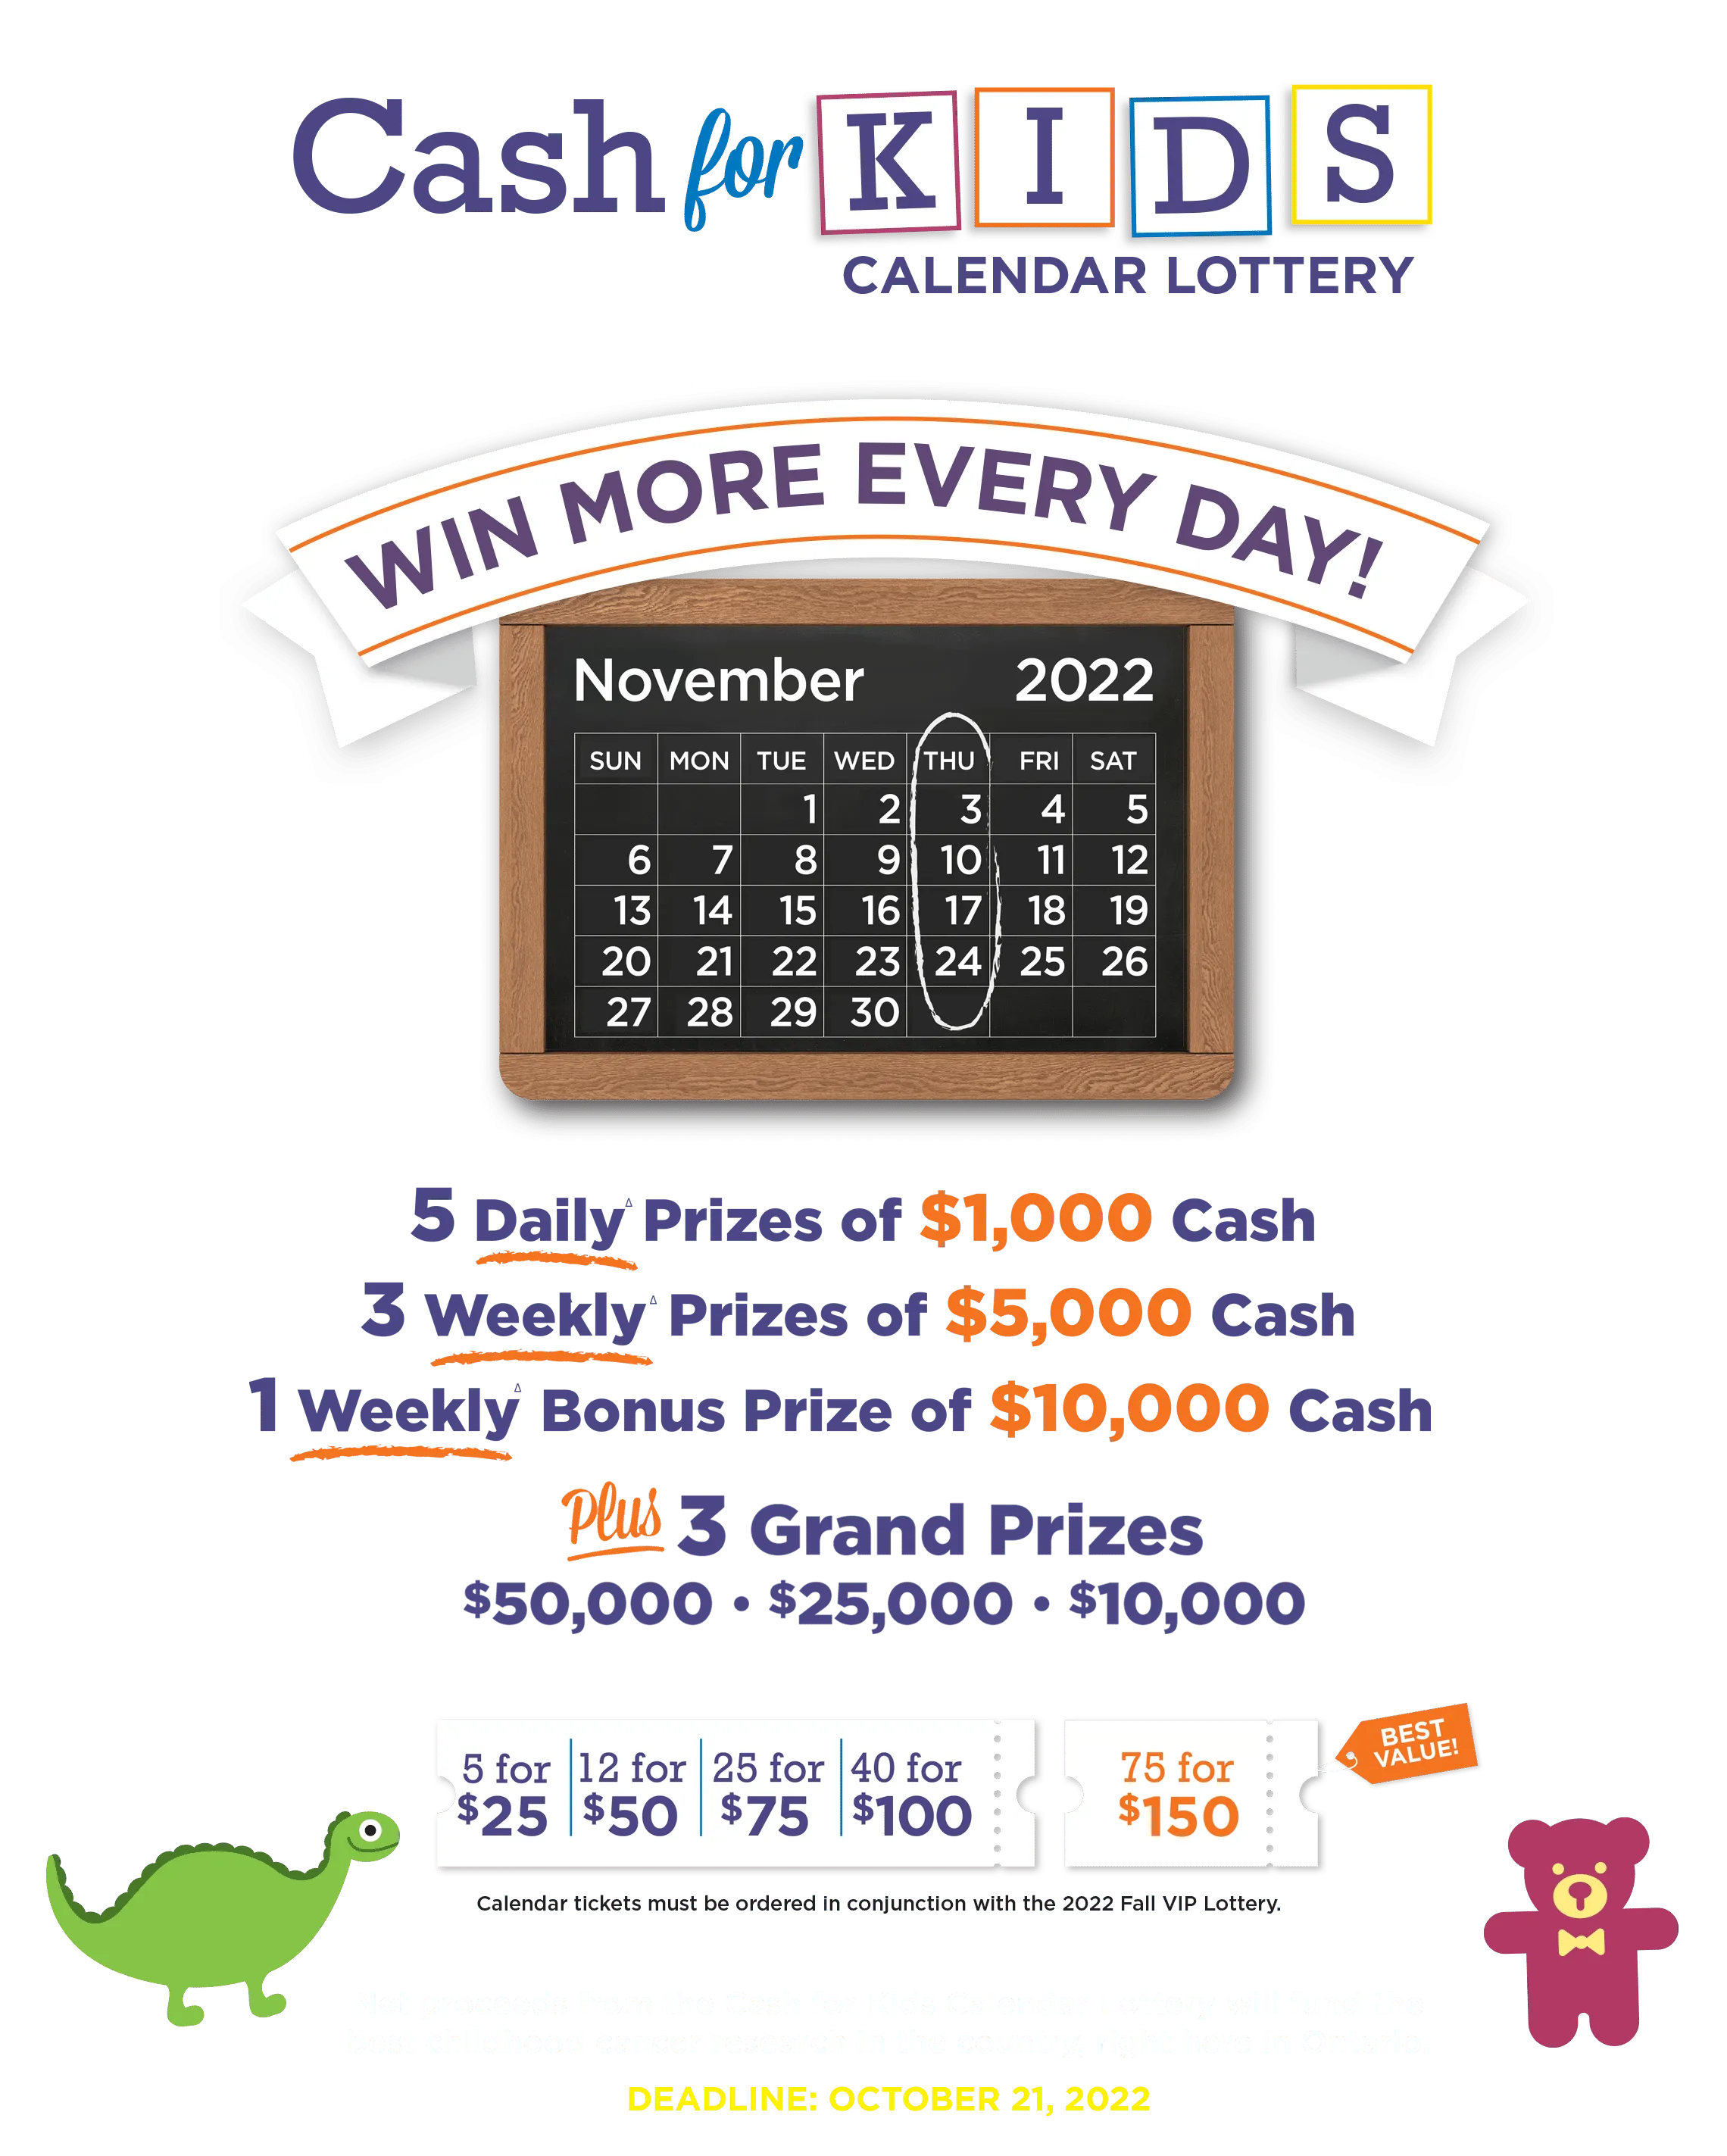 Cash for Kids Calendar - Win more every day!